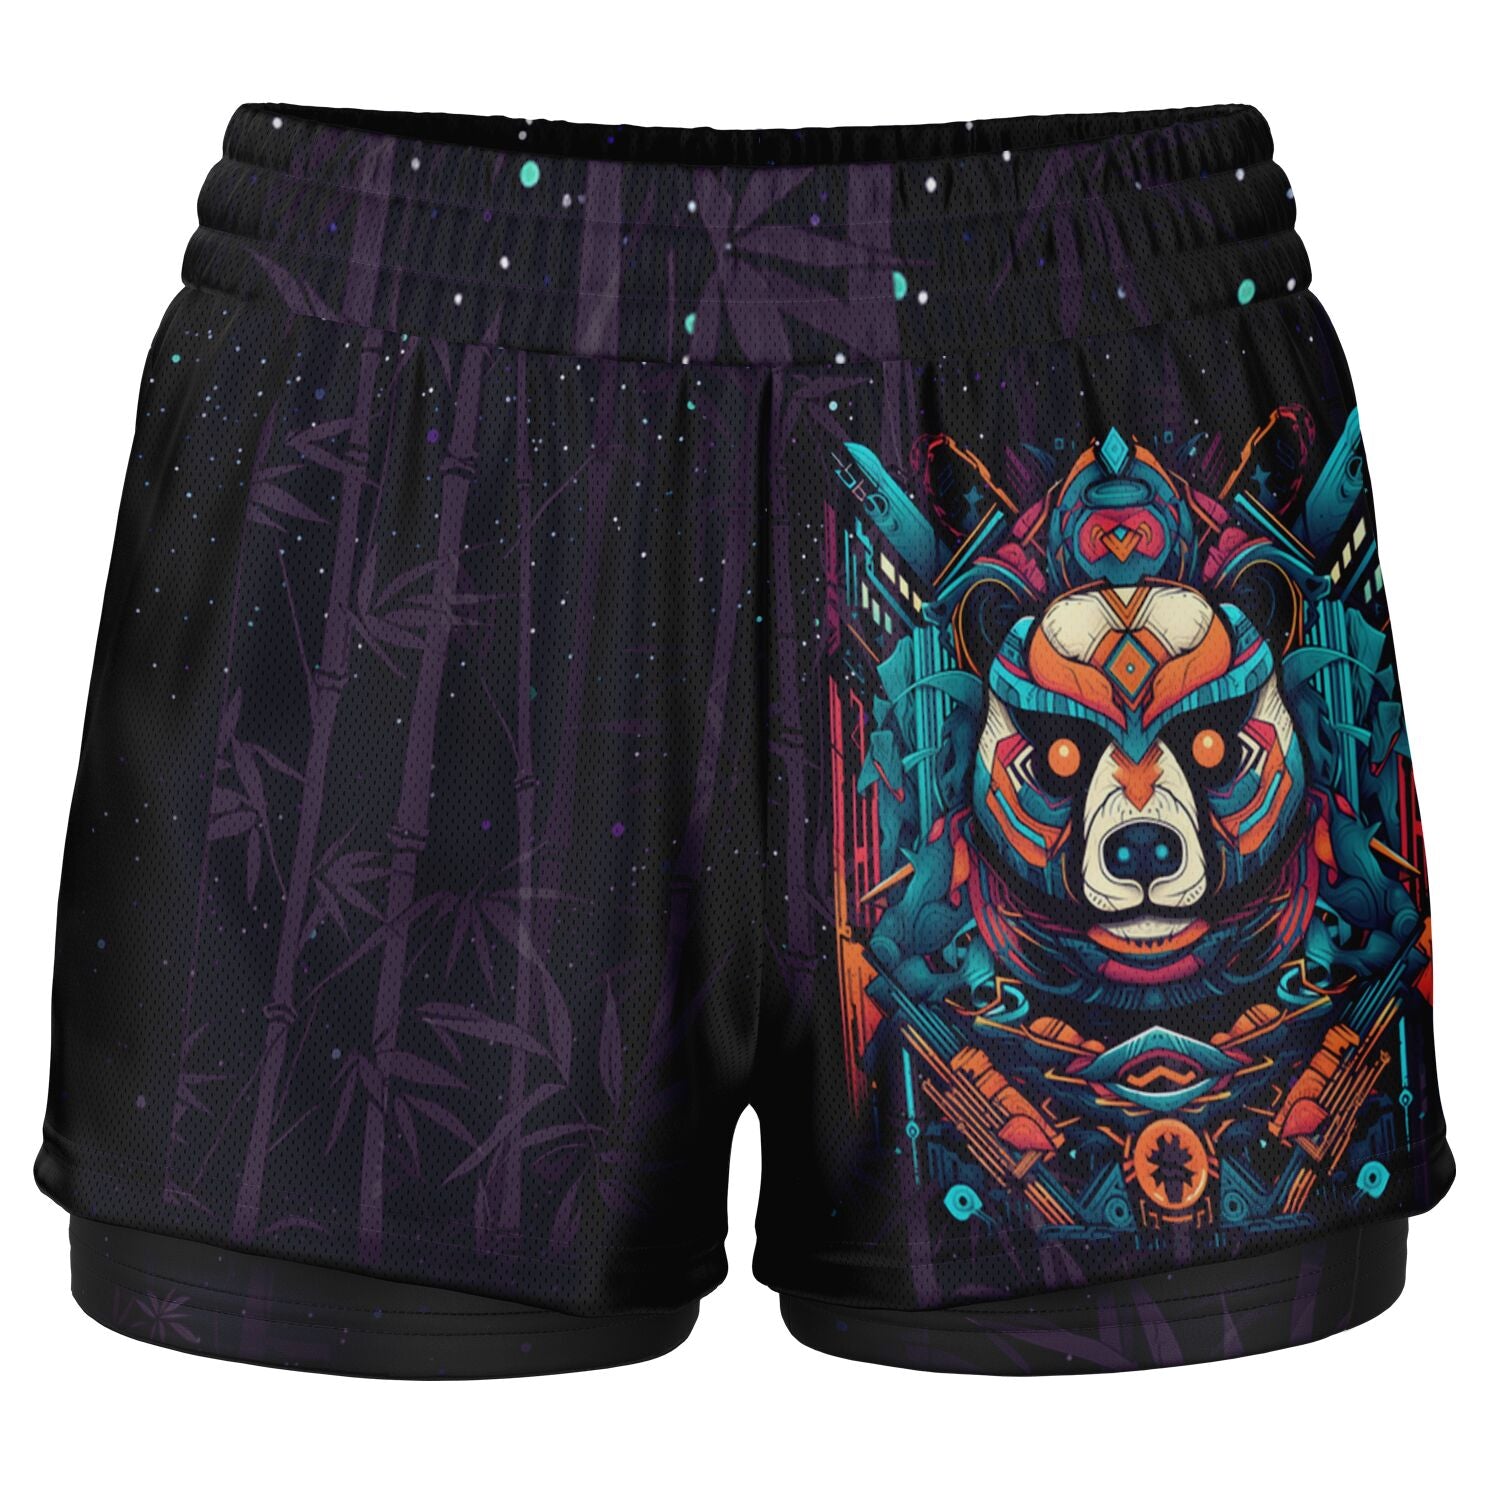 Bamboo Beats Women's 2-in-1 Shorts - Redwolf Jersey Works